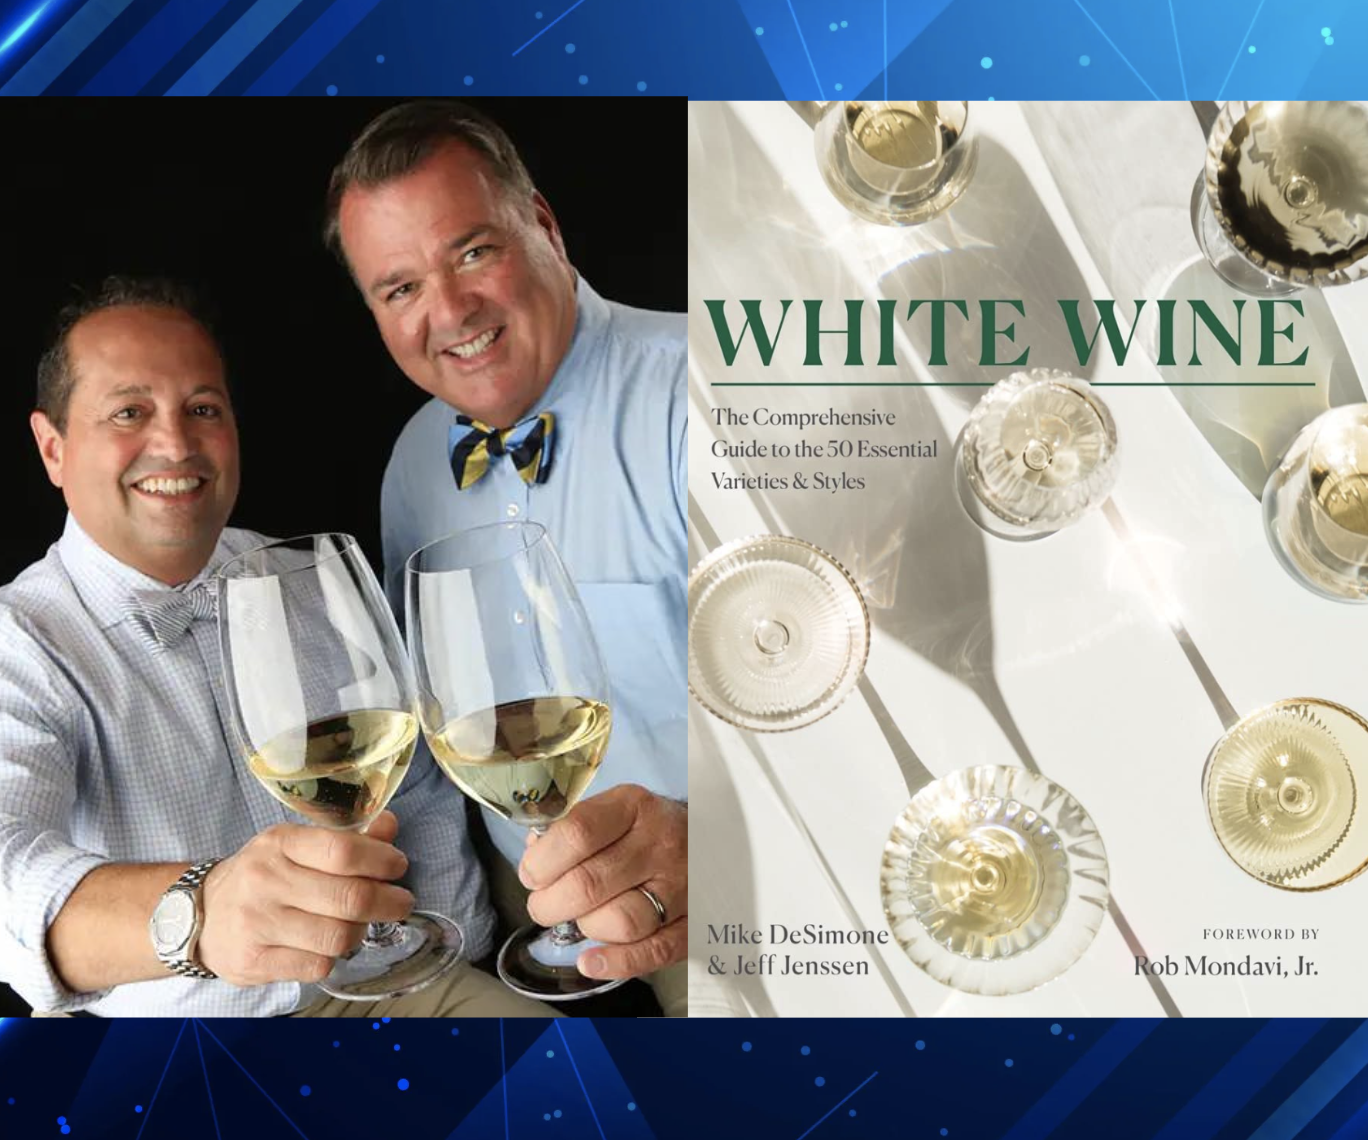 Looking for Great White Wines, Wine Experts Mike DeSimone and Jeff Jenssen's new book White Wine Book, available on Amazon now.